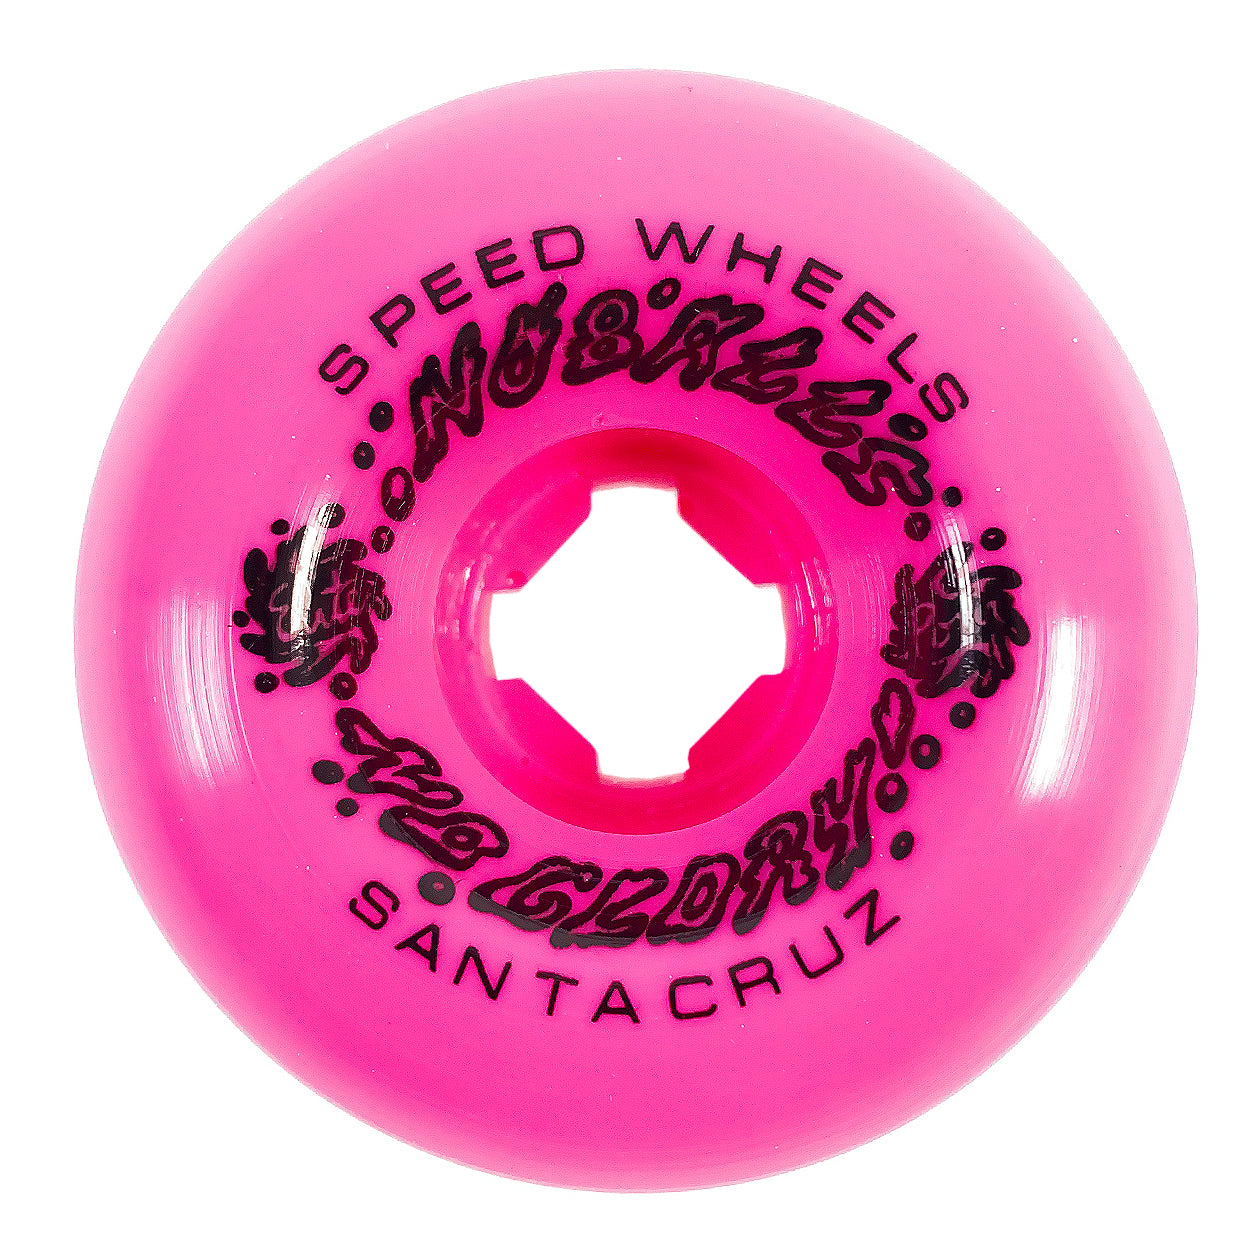 Slime Balls - 60mm - 95a Scudwads Vomits Wheels - Neon Pink - Prime Delux Store